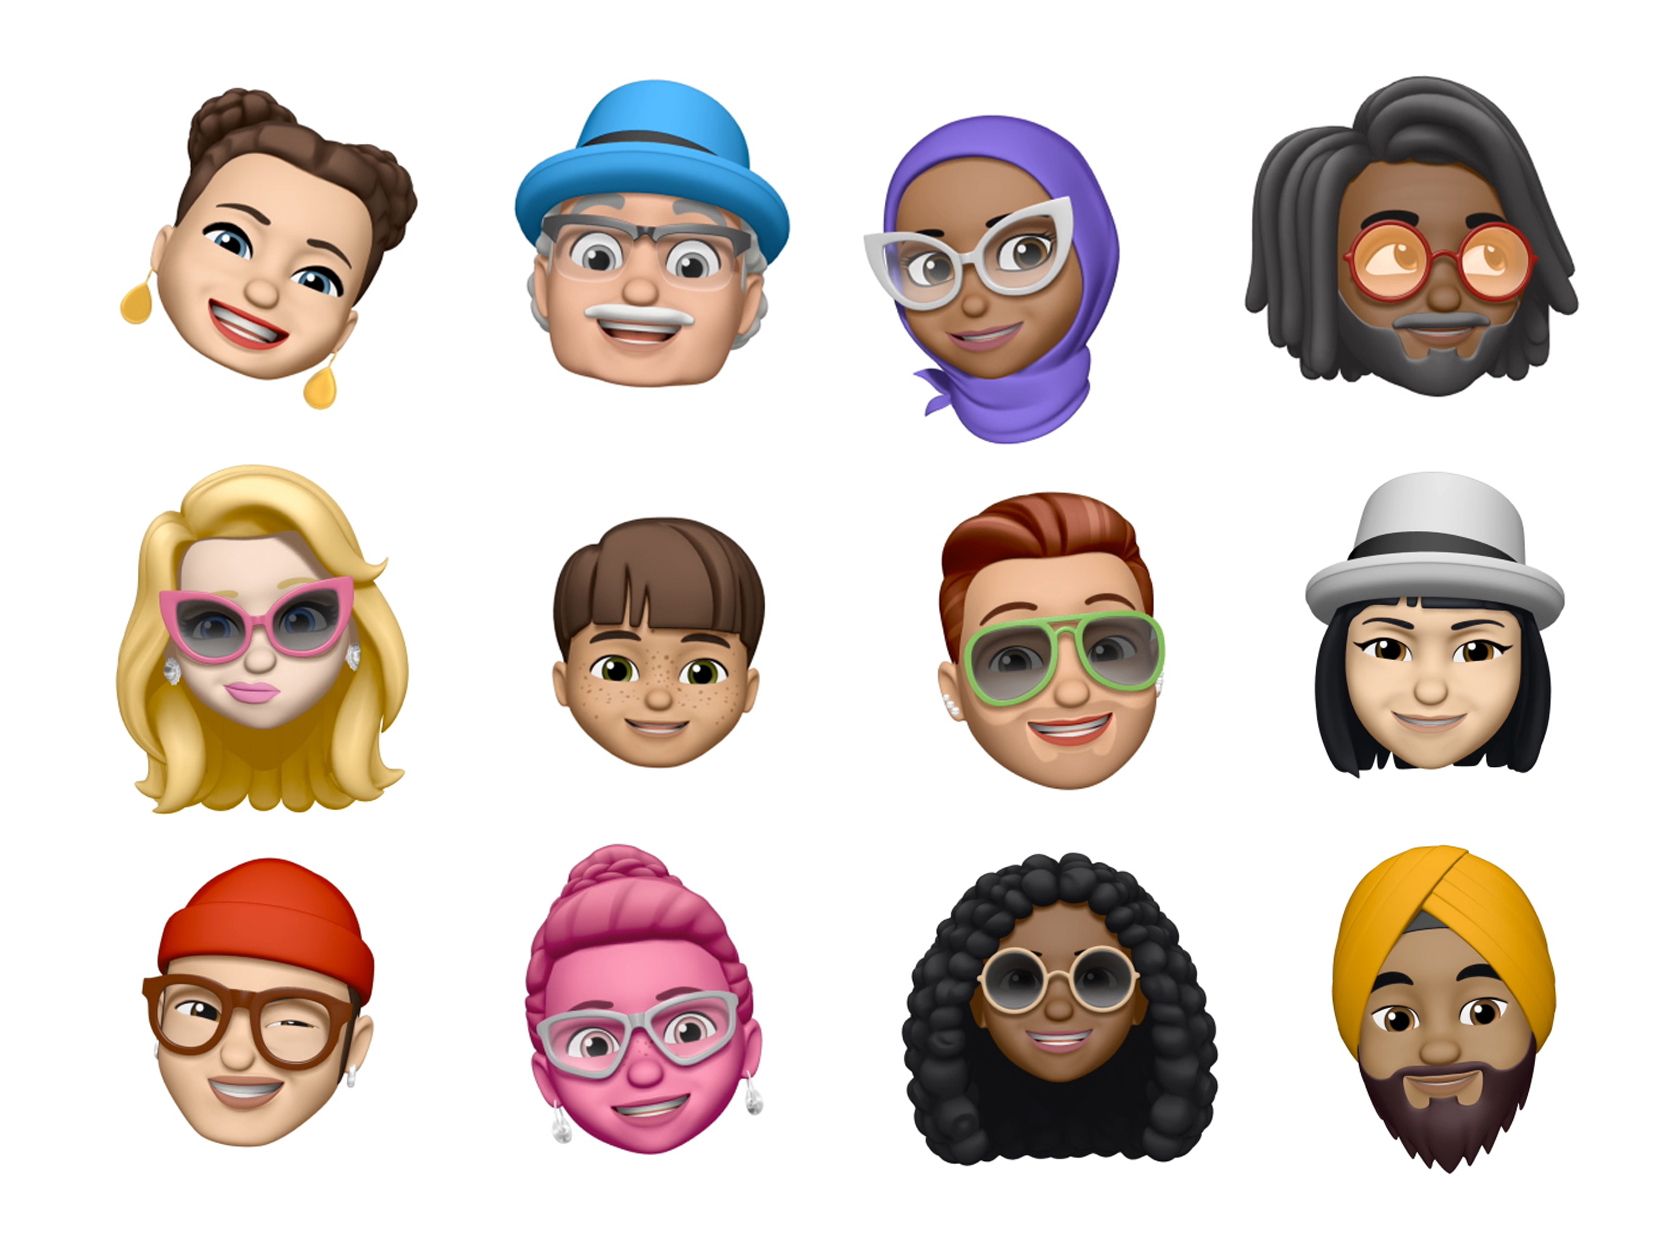 11. Memojis are now a thing